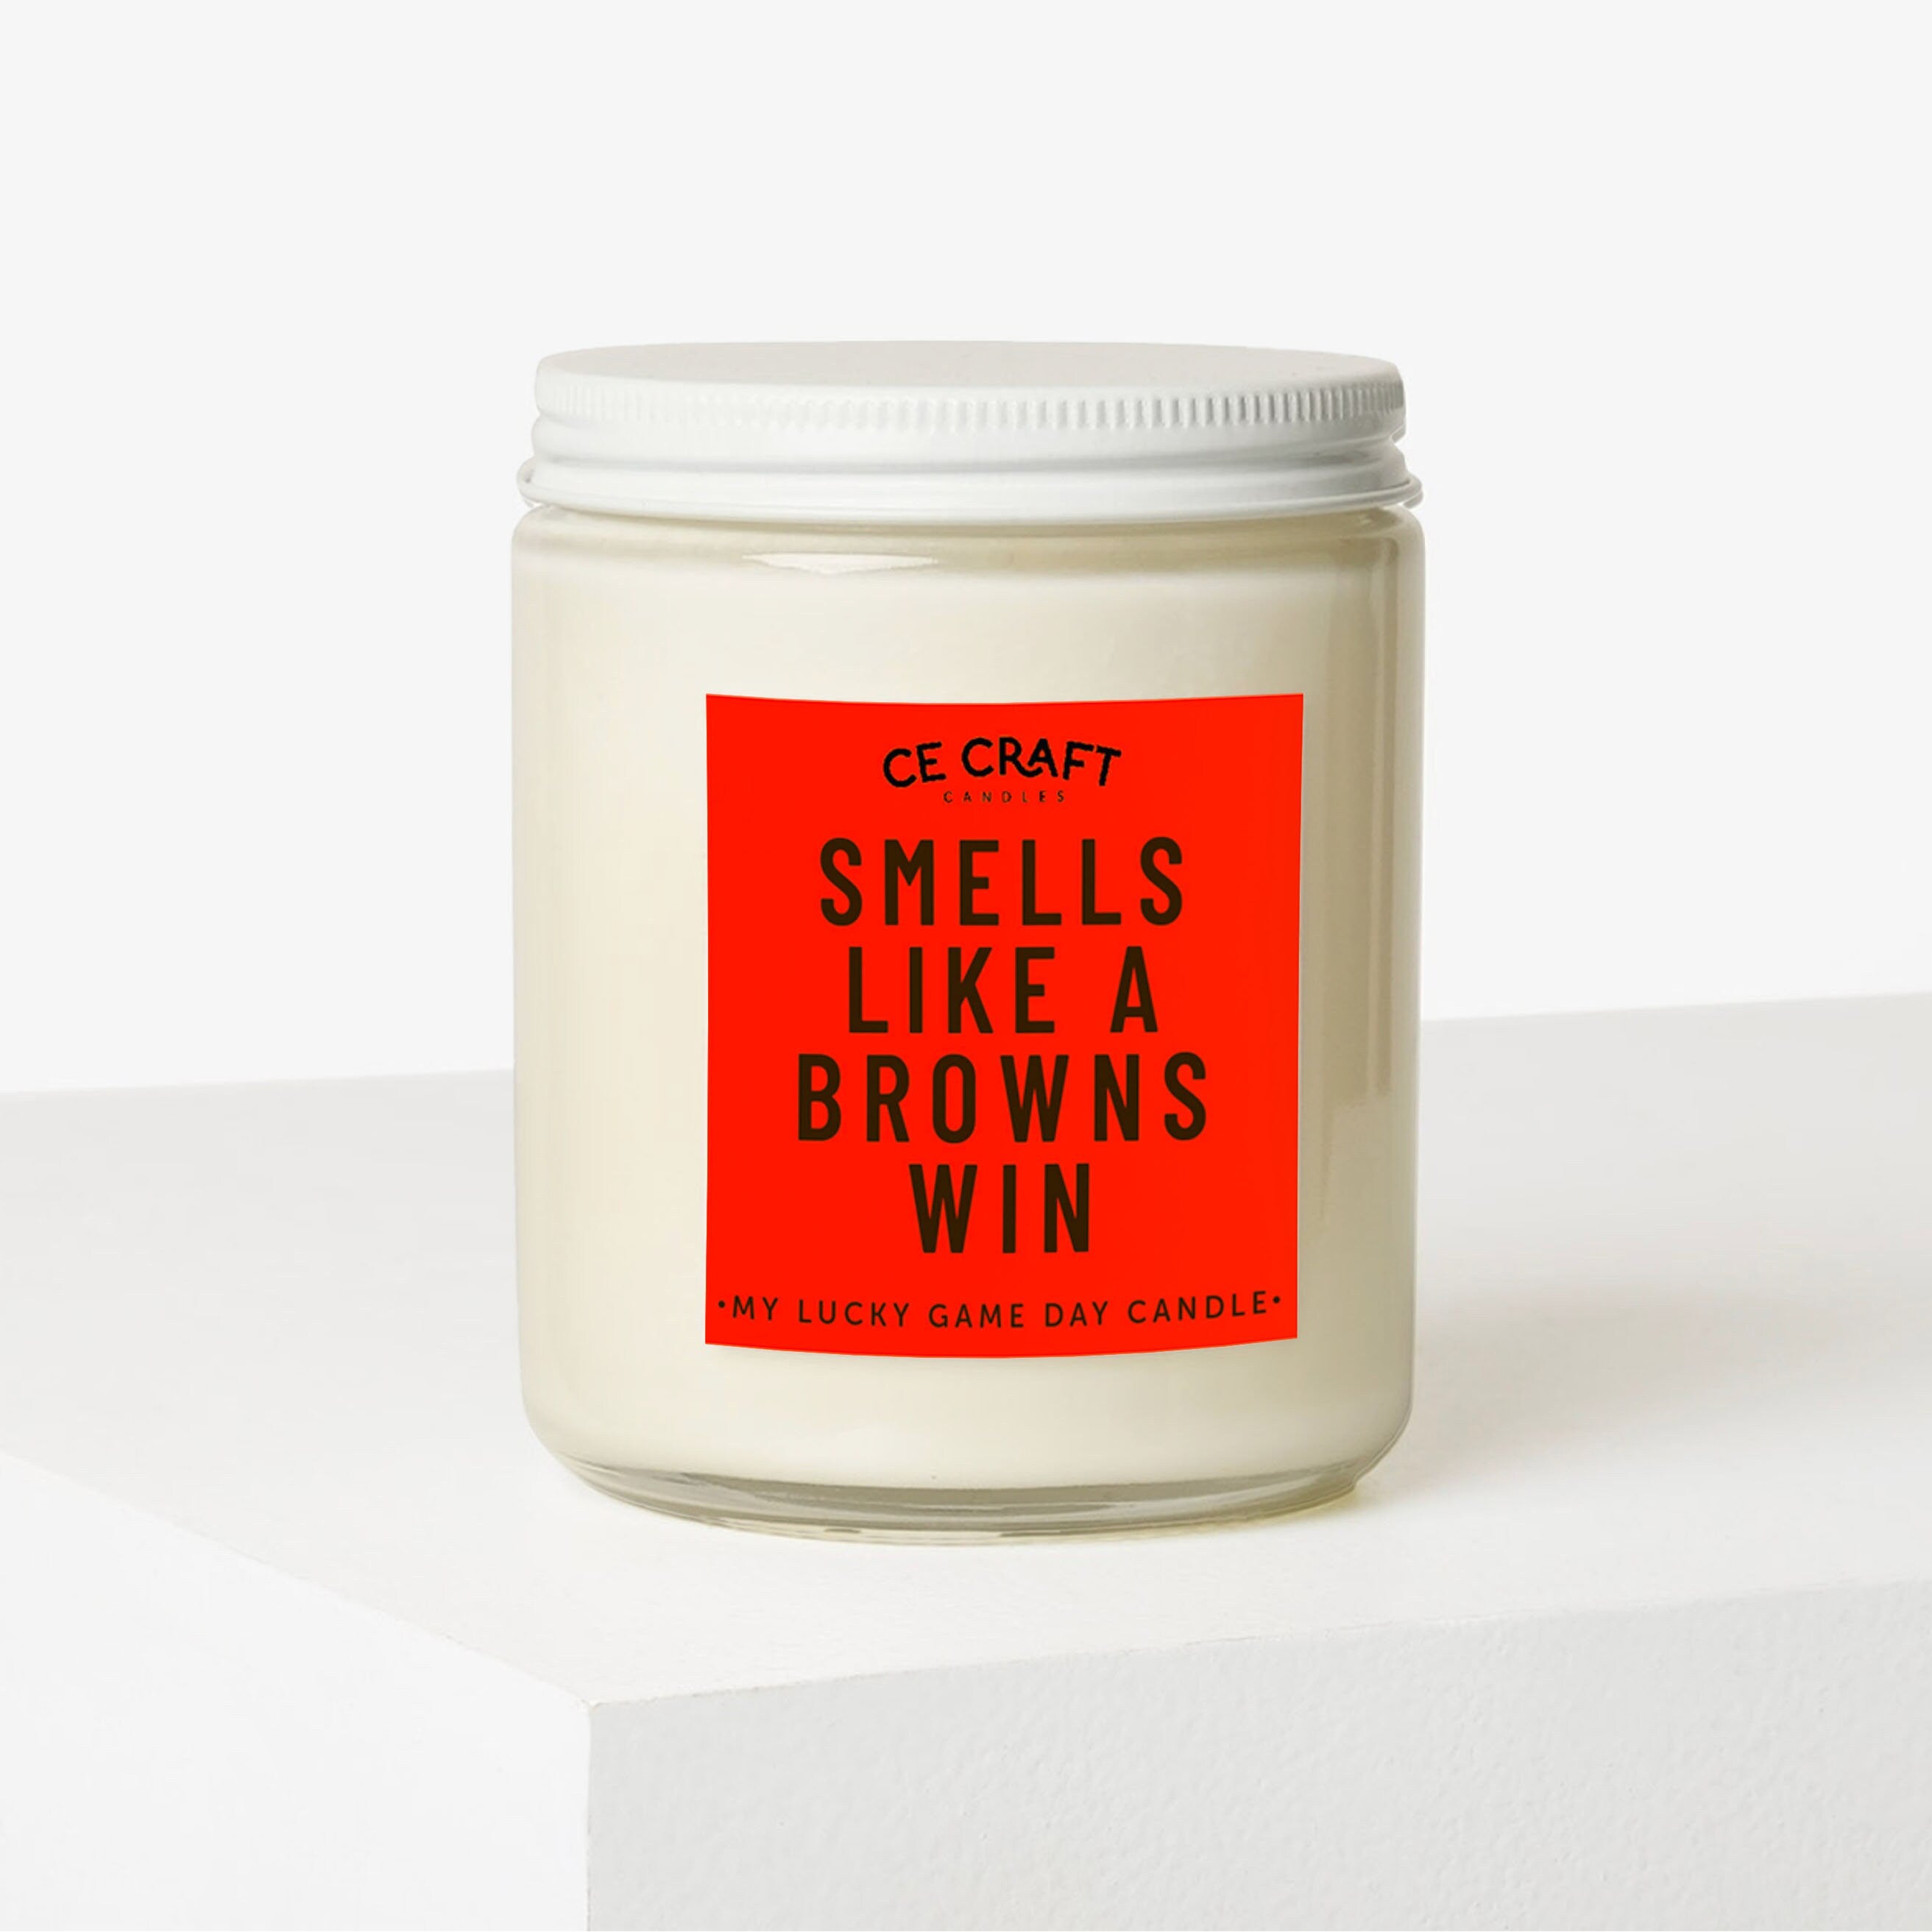 Smells Like a Browns Win Scented Candle